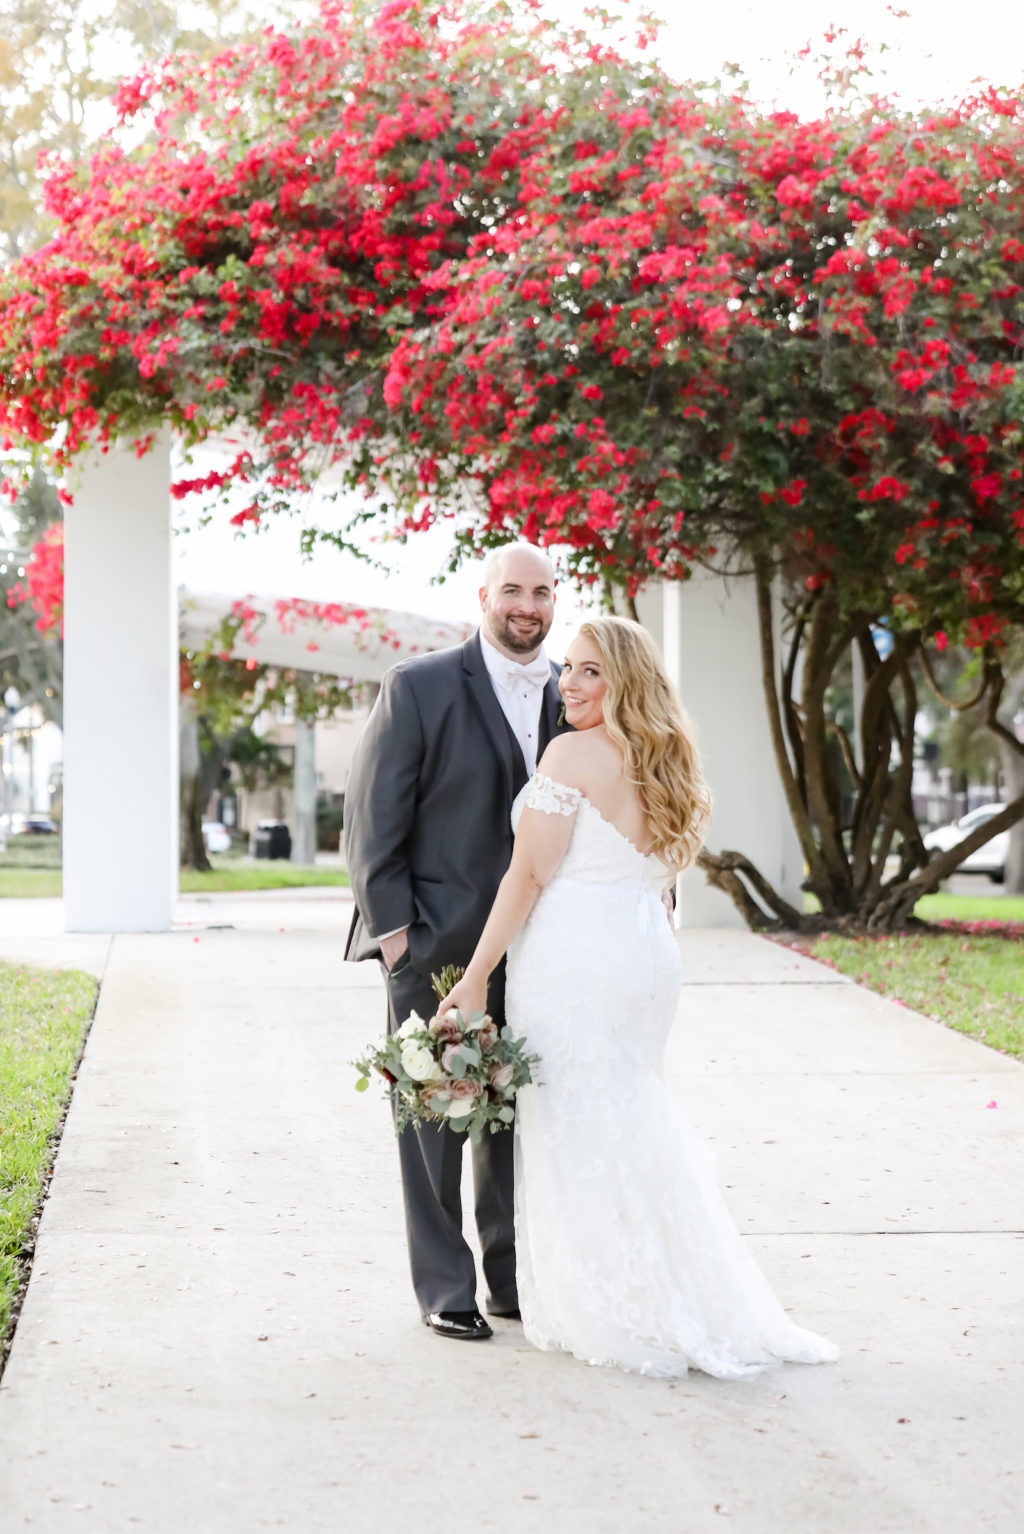 Classic Bride in Off the Shoulder Lace Wedding Dress with Groom, Pink Flower Trees | Downtown St. Pete Wedding Venue The Birchwood | Wedding Photographer Lifelong Photography Studio